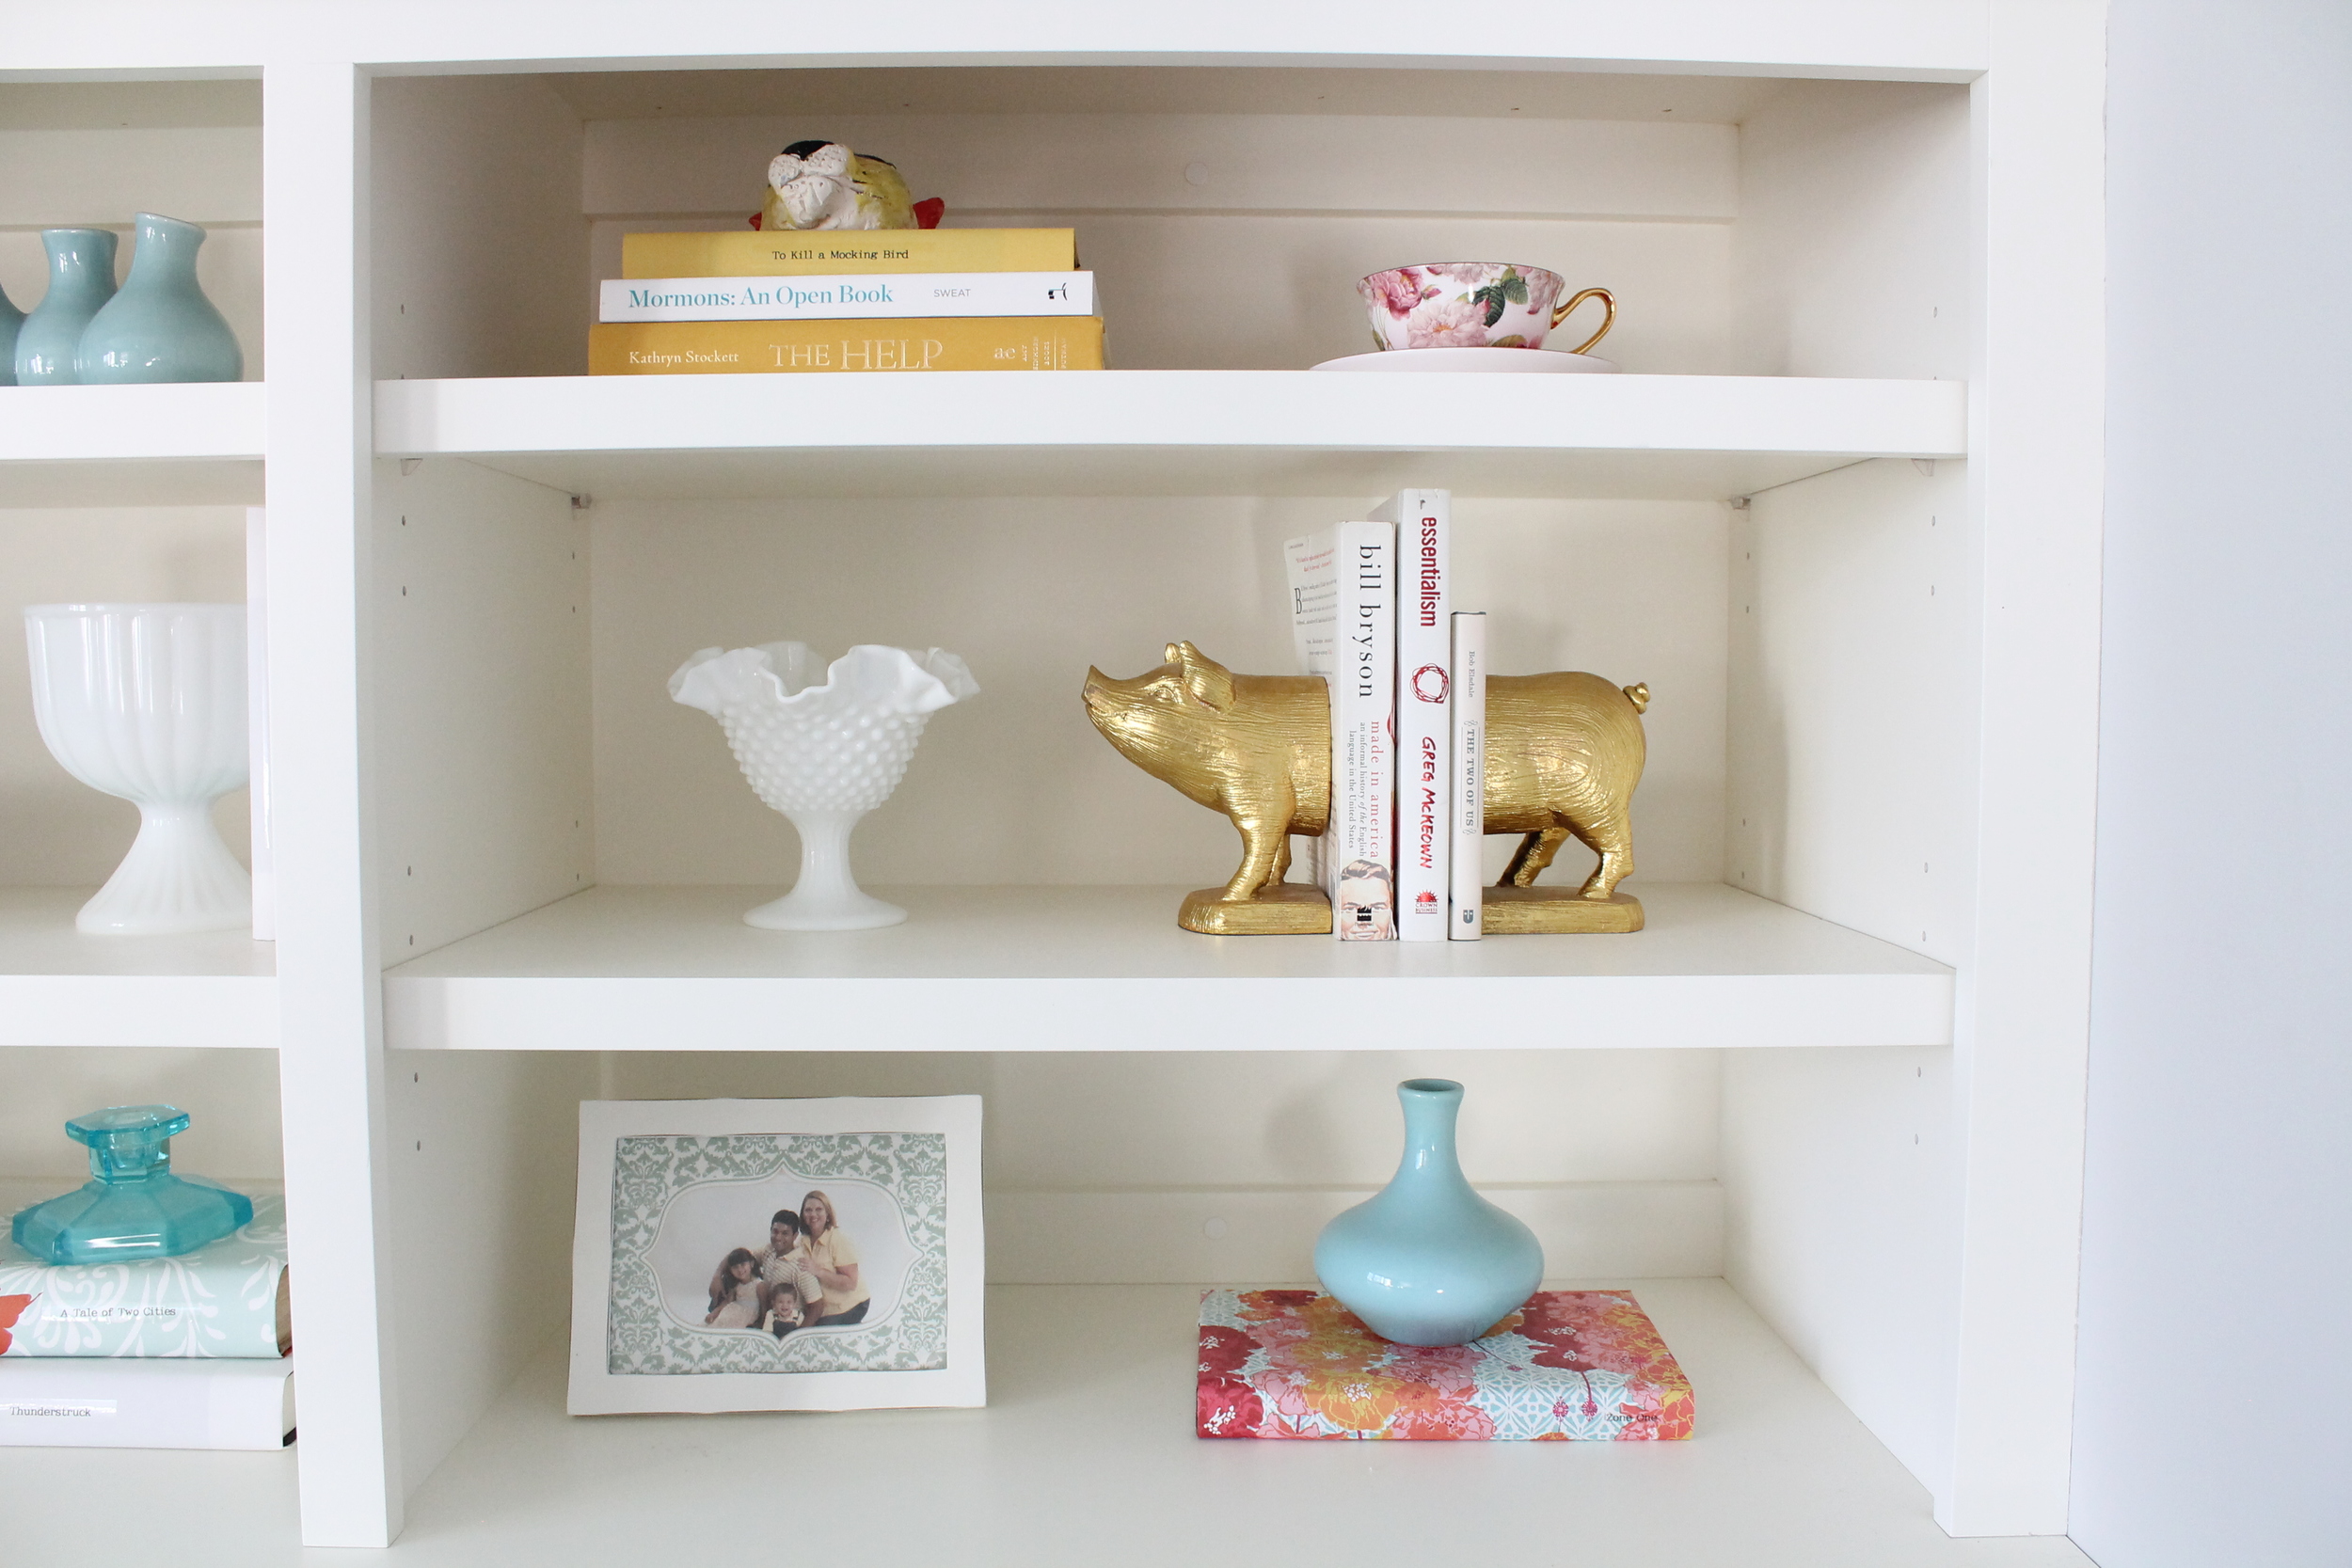 Built in bookshelf decorating ideas. Style a bookshelf with a cohesive color pallet by covering books with pretty paper. Add some glass objects and small frames to round out the design.